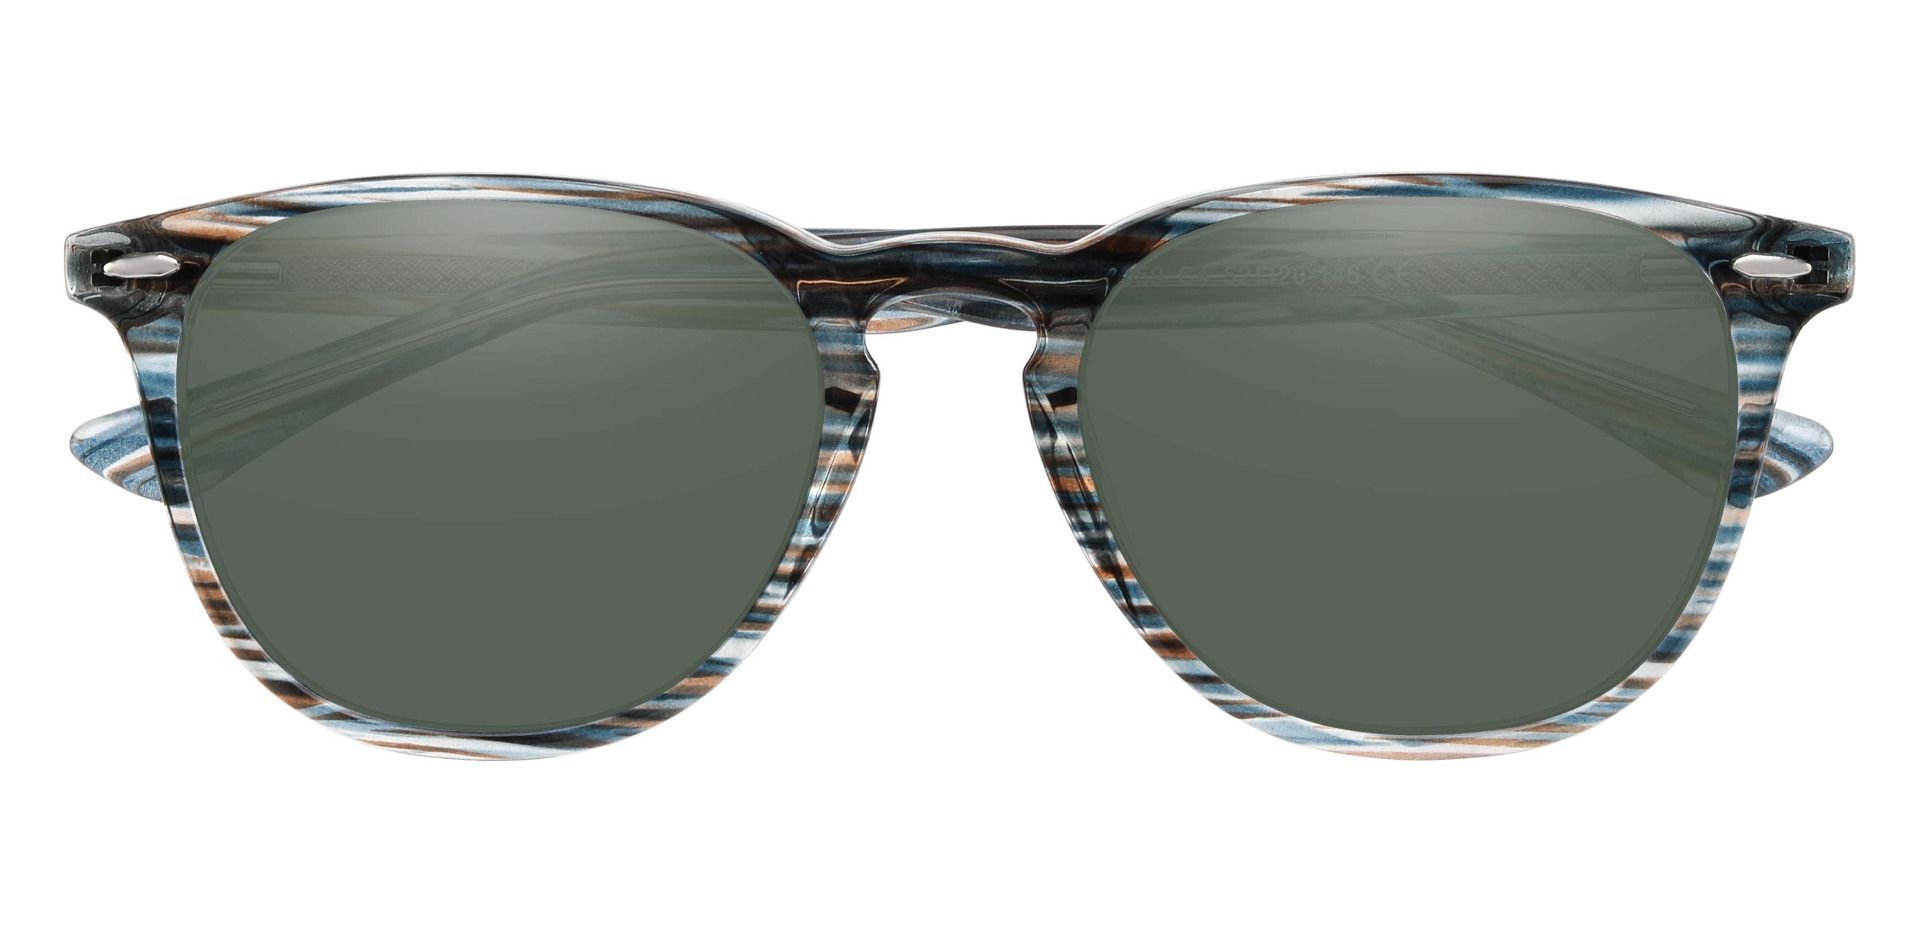 Sycamore Oval Reading Sunglasses - Blue Frame With Green Lenses